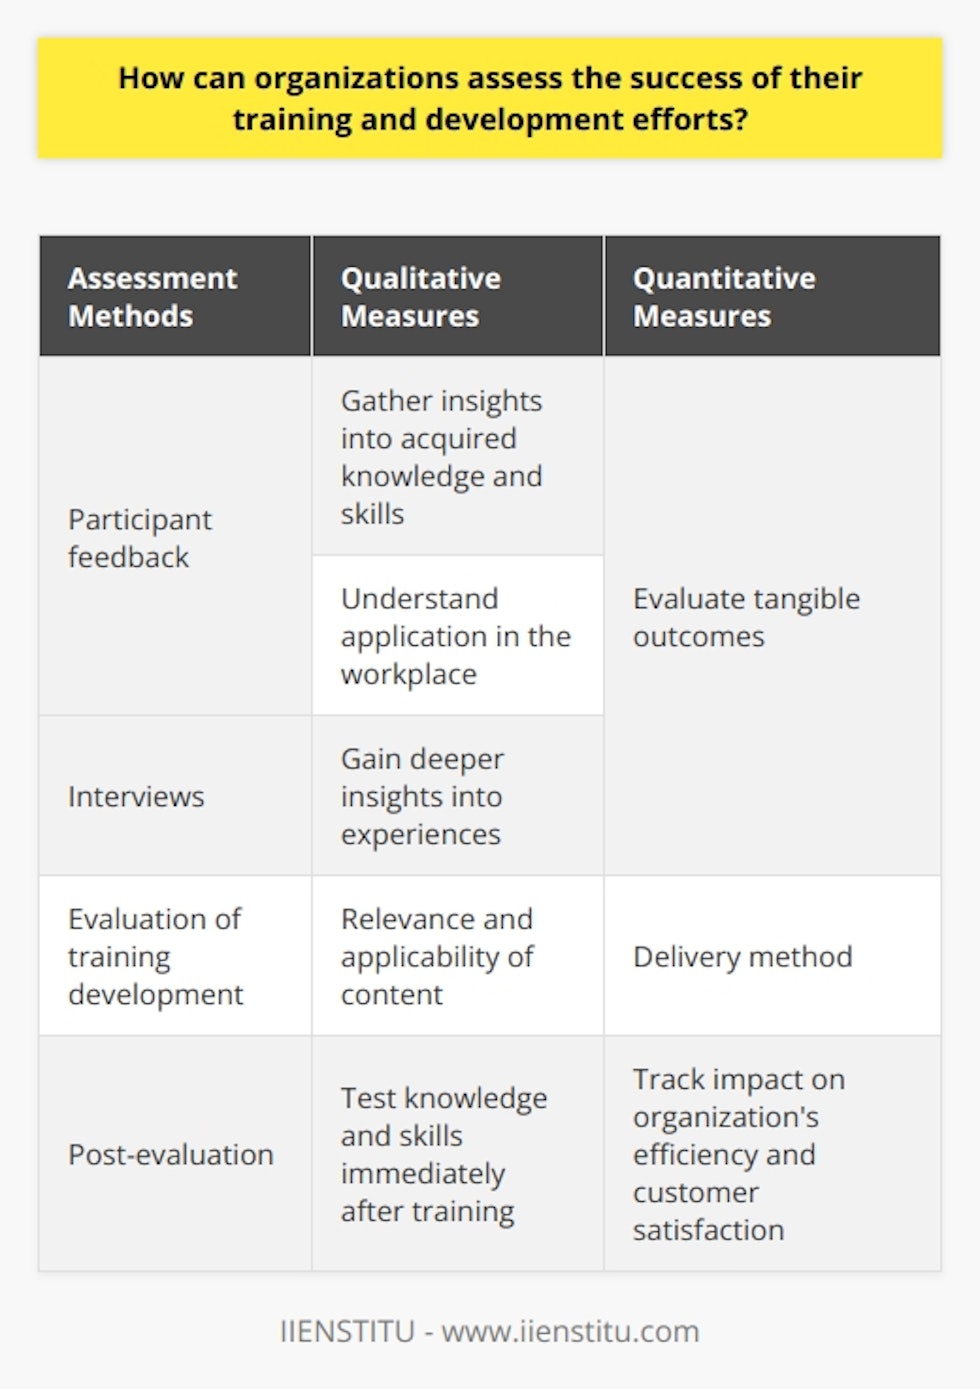 Assessing the success of training and development efforts within an organization is crucial for measuring the effectiveness of these programs and identifying areas for improvement. There are various methods organizations can use to assess the success of their training and development efforts.Firstly, qualitative measures such as participant feedback and interviews play a significant role in evaluating training programs. By gathering feedback from participants, organizations can gain insight into the knowledge and skills acquired during the training and how these have been applied in the workplace. Interviews can provide deeper insights into participants' experiences and the overall quality of the training program.Quantitative measures also help assess the success of training and development efforts. Organizations can evaluate tangible outcomes such as increased efficiency, improved customer service, or reduced staff turnover. These data-driven metrics provide concrete evidence of the training program's impact on the organization.In addition to these measures, assessing the training and development process itself is crucial. Organizations should evaluate how the training was developed, considering factors such as the relevance and applicability of the content to the target audience. The delivery method and how well the staff received the training are also important considerations. Feedback from program leaders and trainers can provide valuable insights into the effectiveness of the training program.Furthermore, post-evaluation is necessary to assess the long-term success of the training program. This can involve testing participants' knowledge and skills immediately after the training, as well as conducting follow-up assessments over time. Tracking the training's impact on the organization's efficiency and customer satisfaction can also help gauge the overall effectiveness of the program.By conducting comprehensive assessments of their training and development efforts, organizations can gain valuable insights into the success of these programs. This information can be used to make necessary improvements and refine future training initiatives, ultimately leading to a more effective and impactful learning experience for employees.